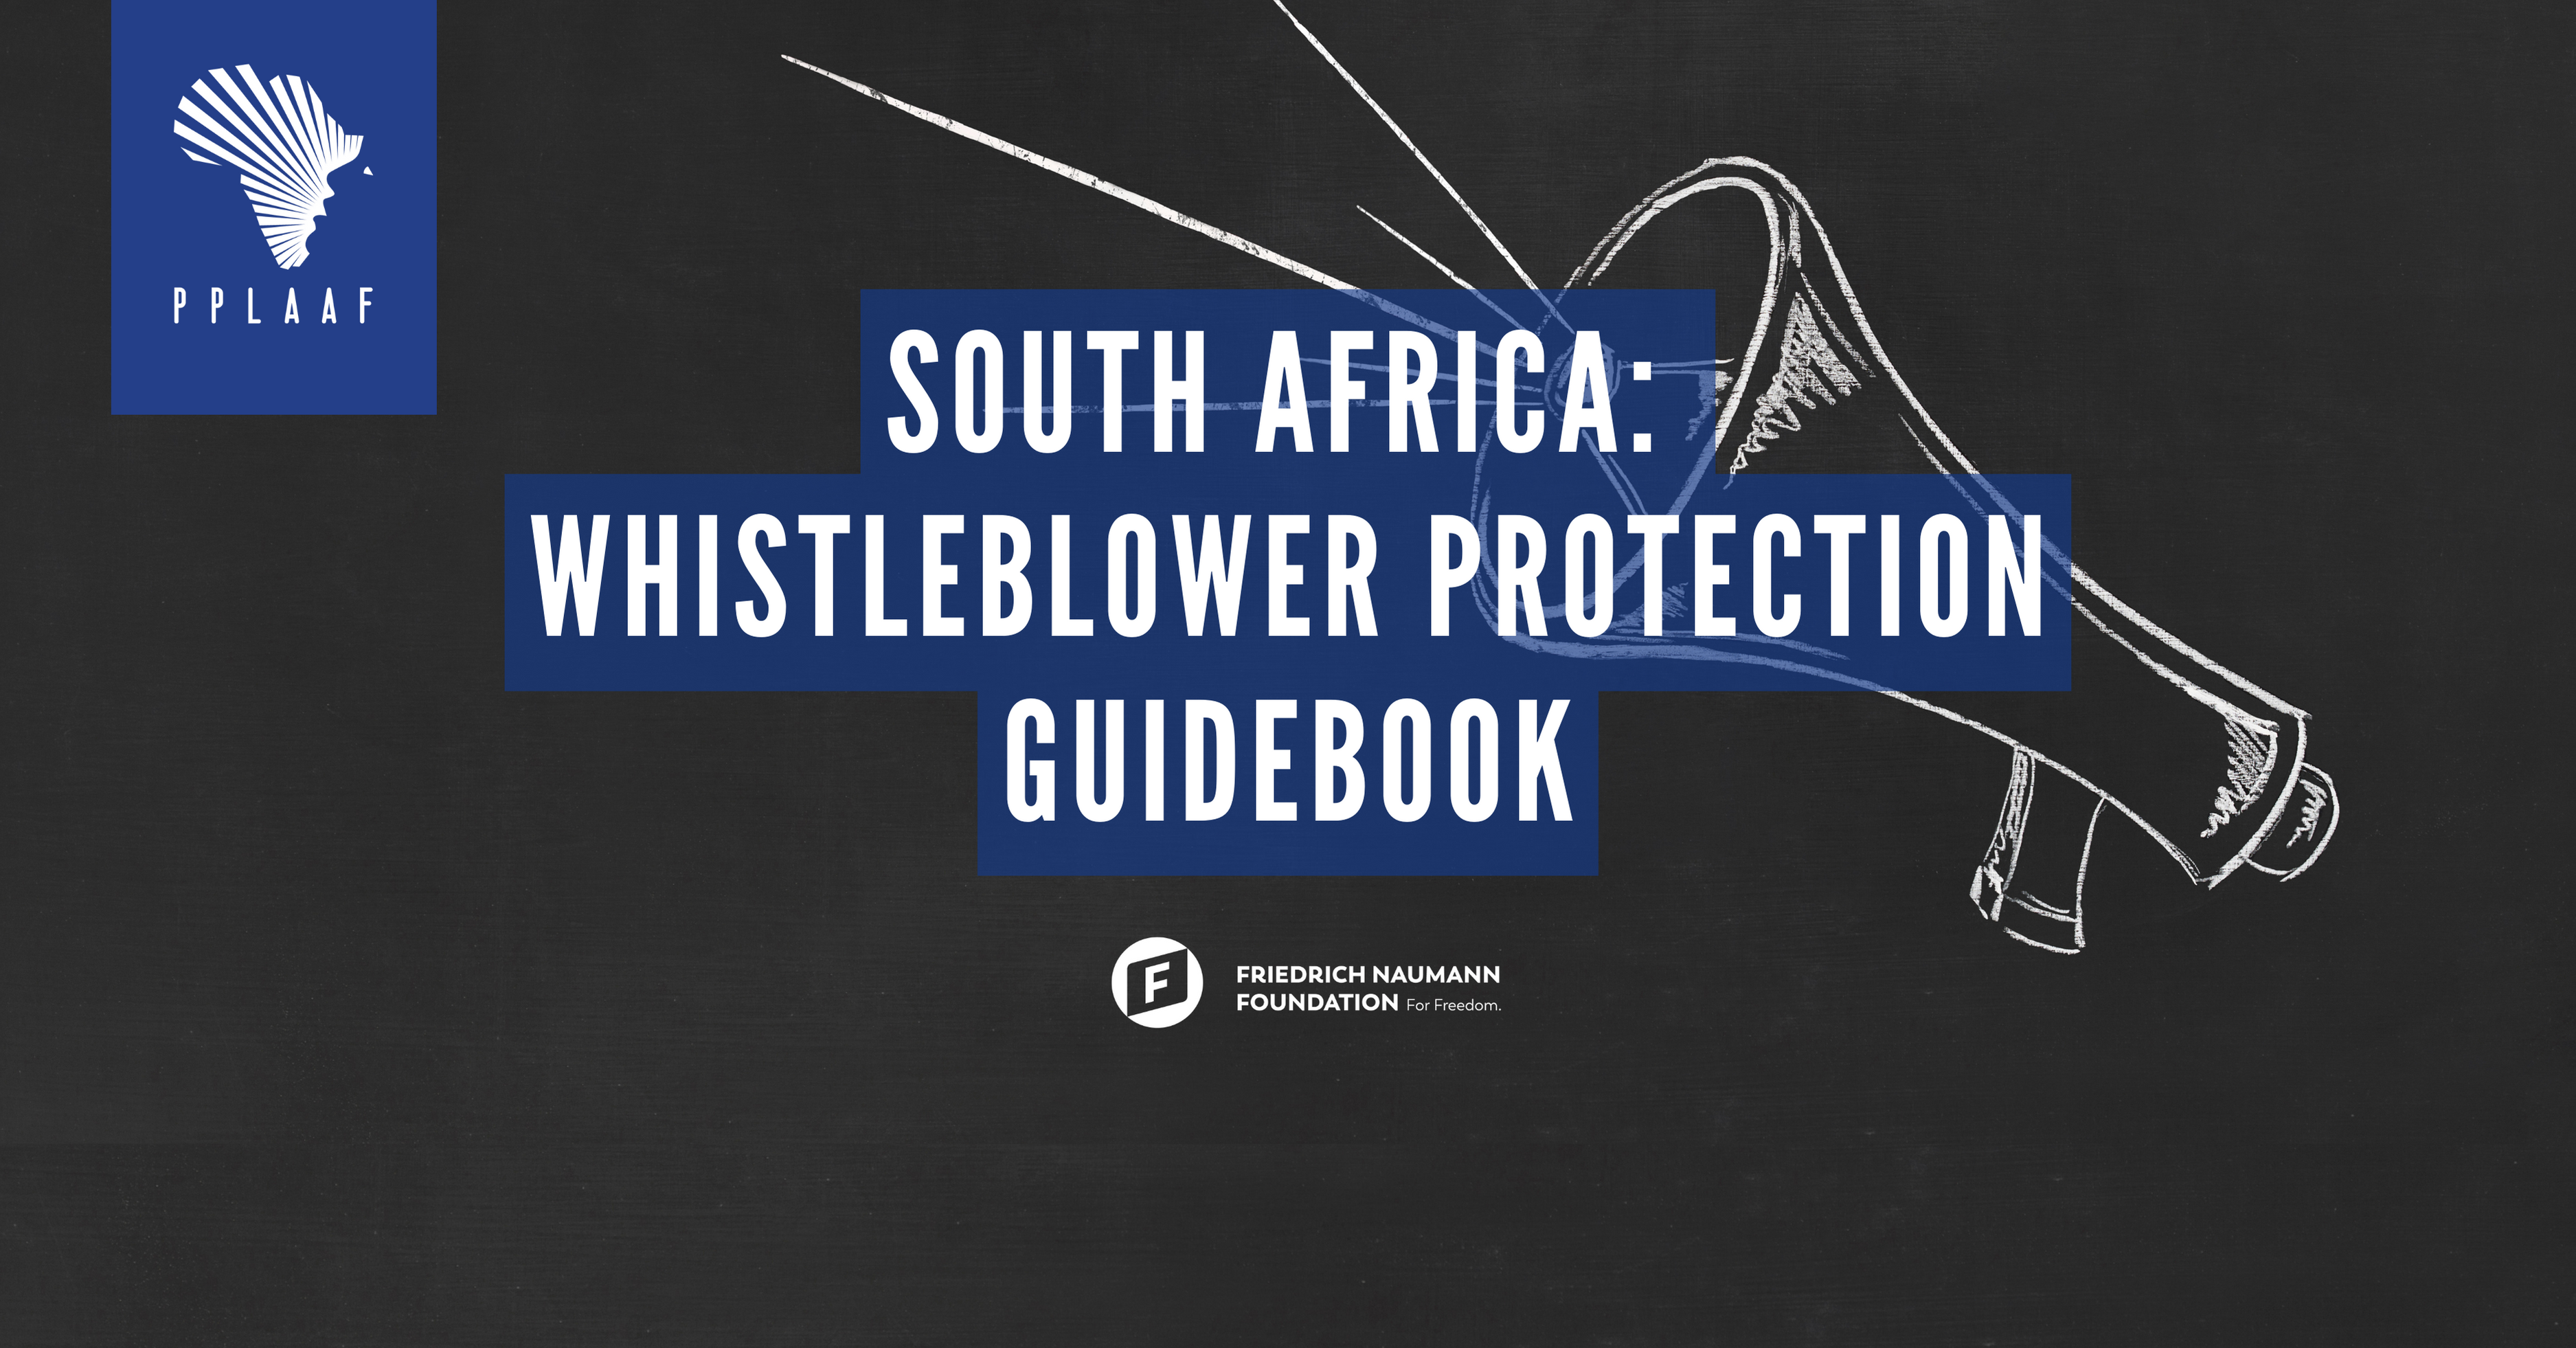 South Africa: Whistleblower Protection Guidebook 